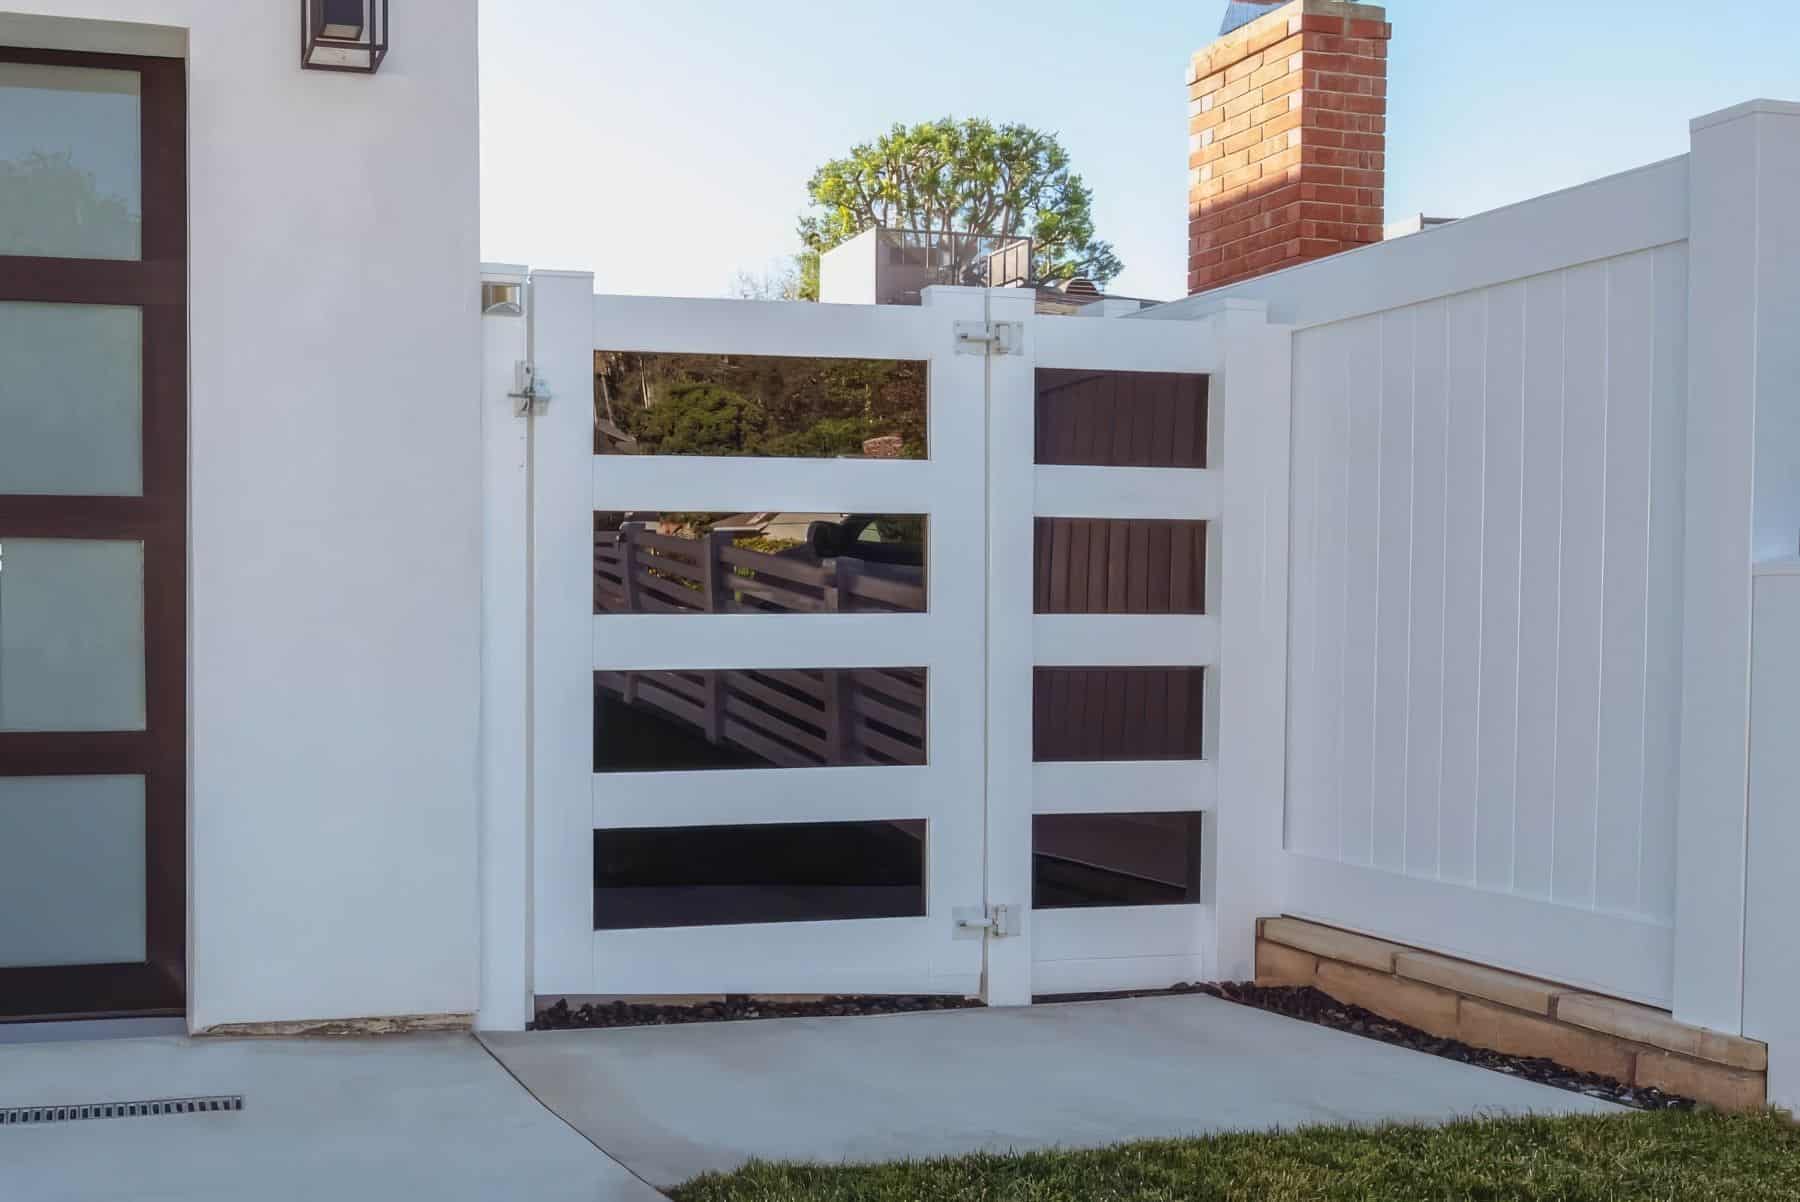 A minimalist, pure white vinyl side gate connecting the front lawn to the backyard featuring tinted reflective glass.